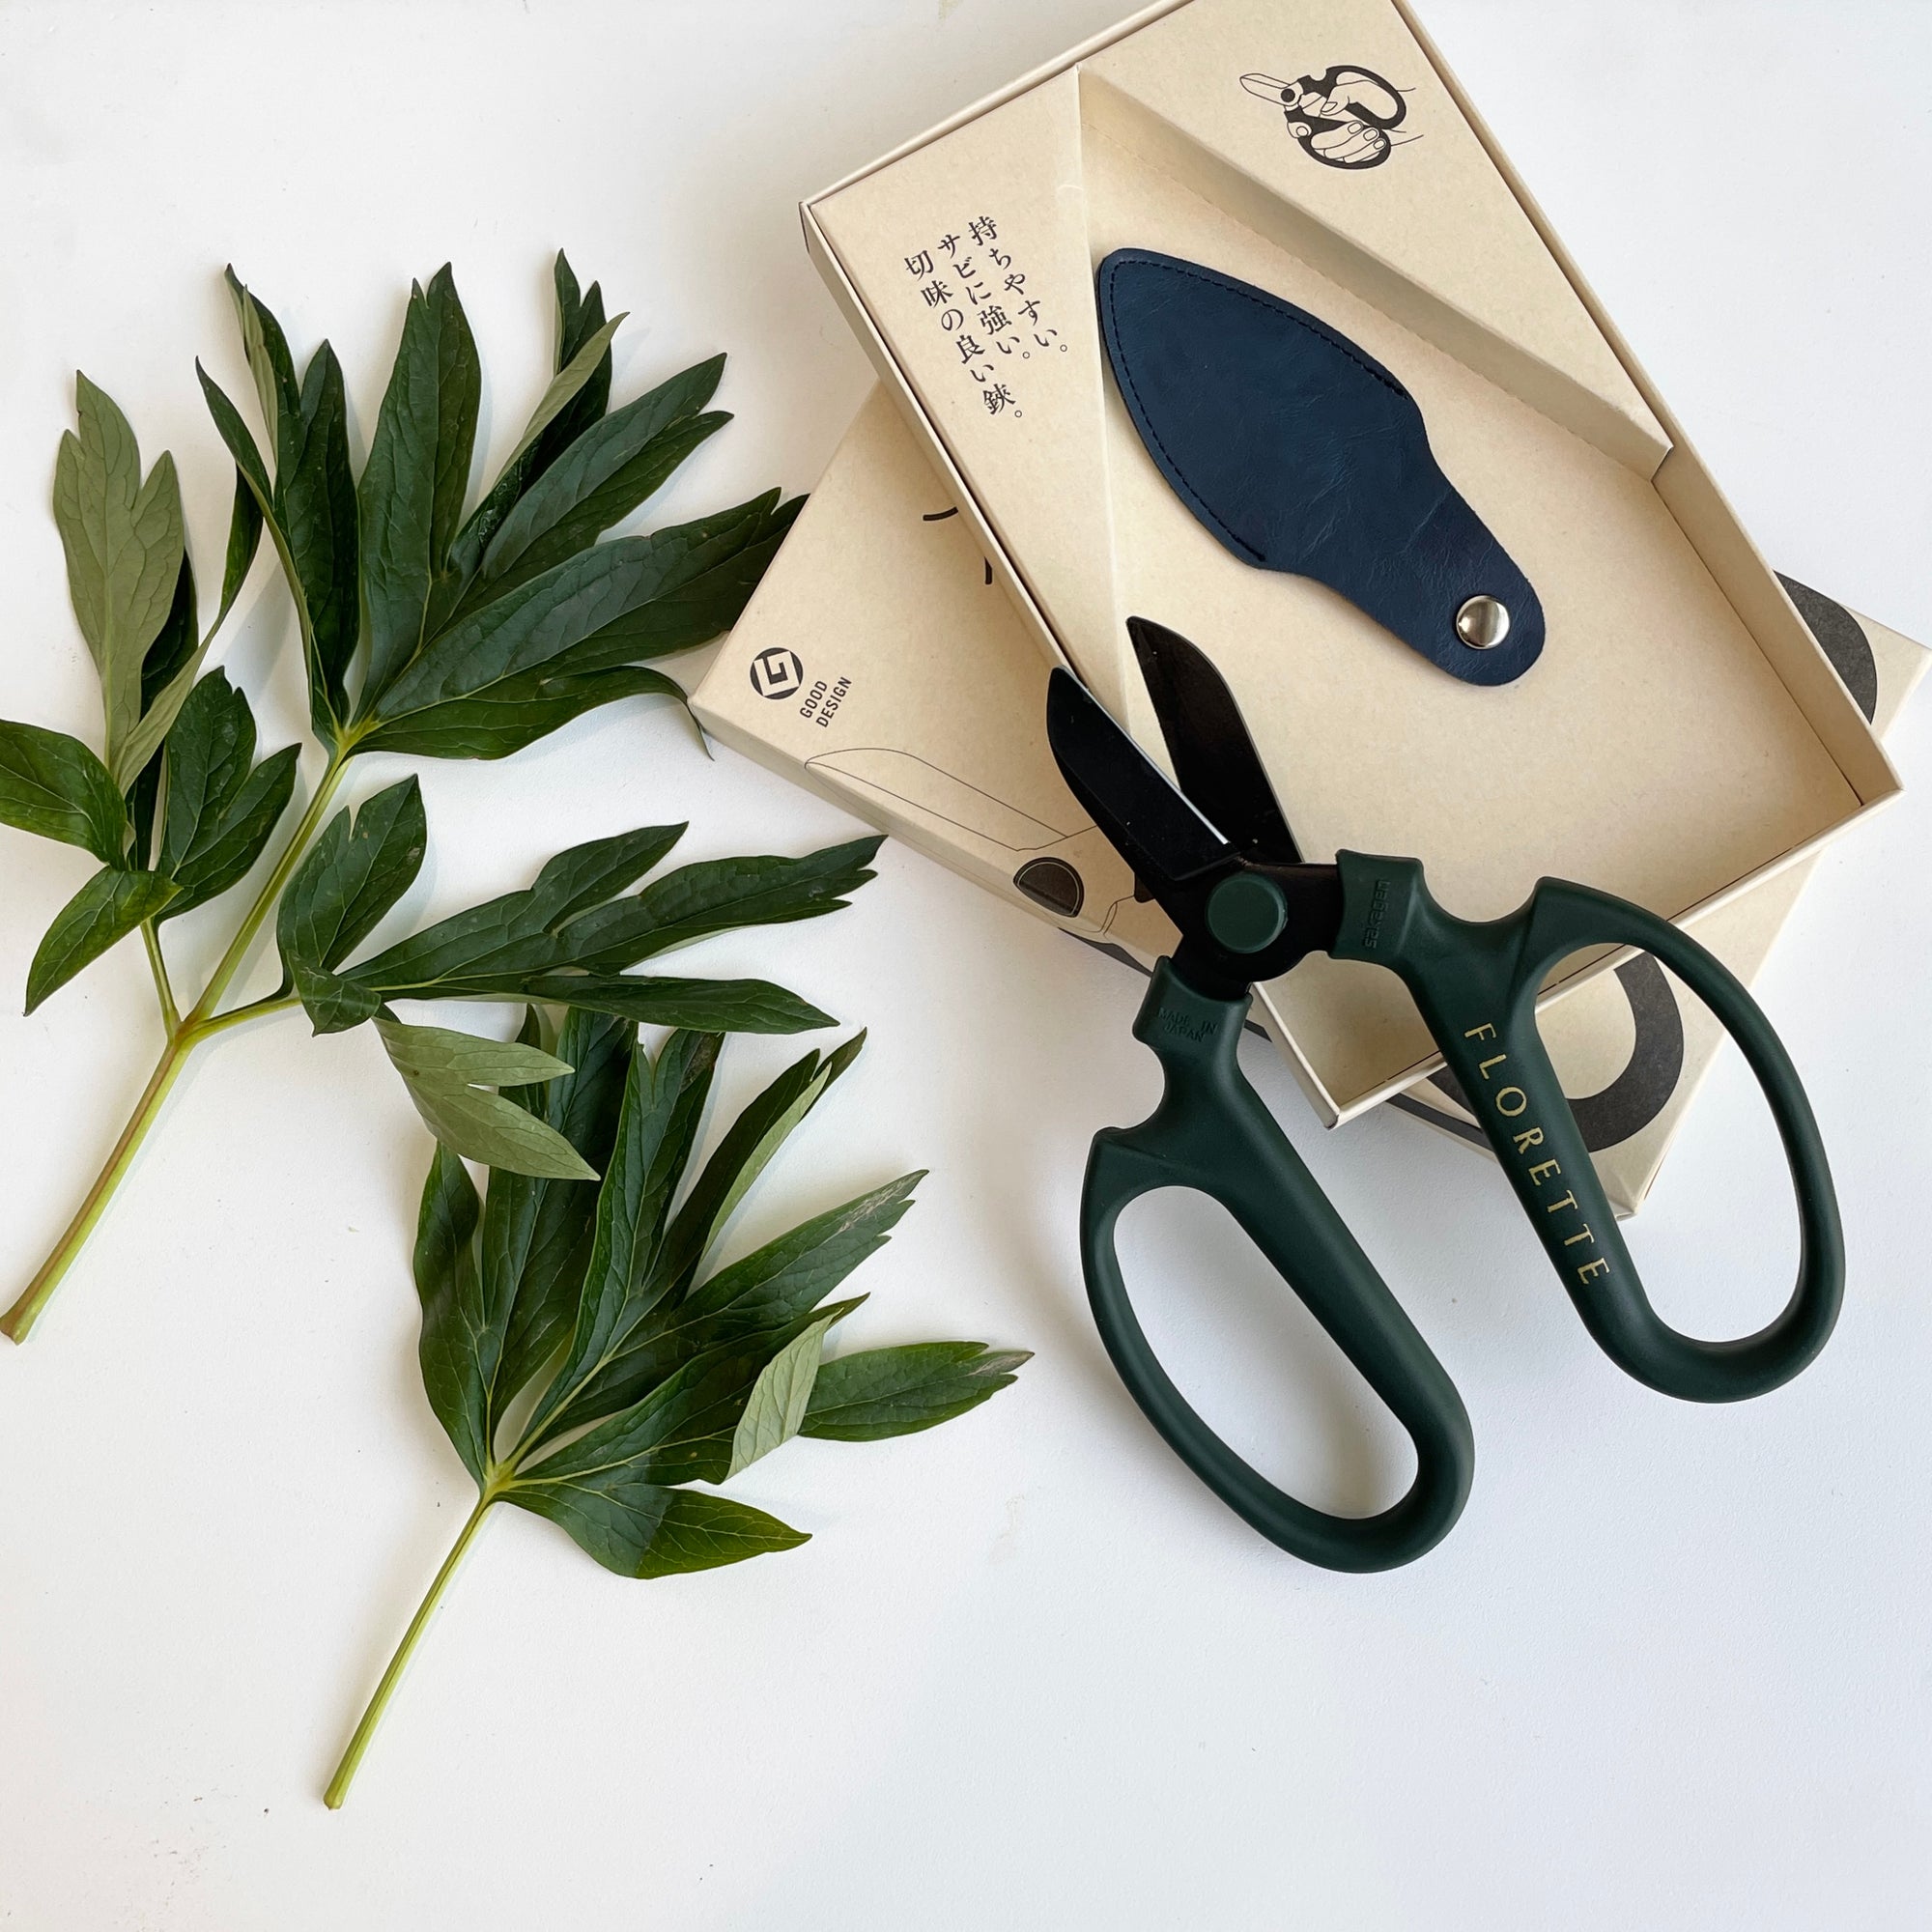 Floristry Scissors - Green with Black Blade